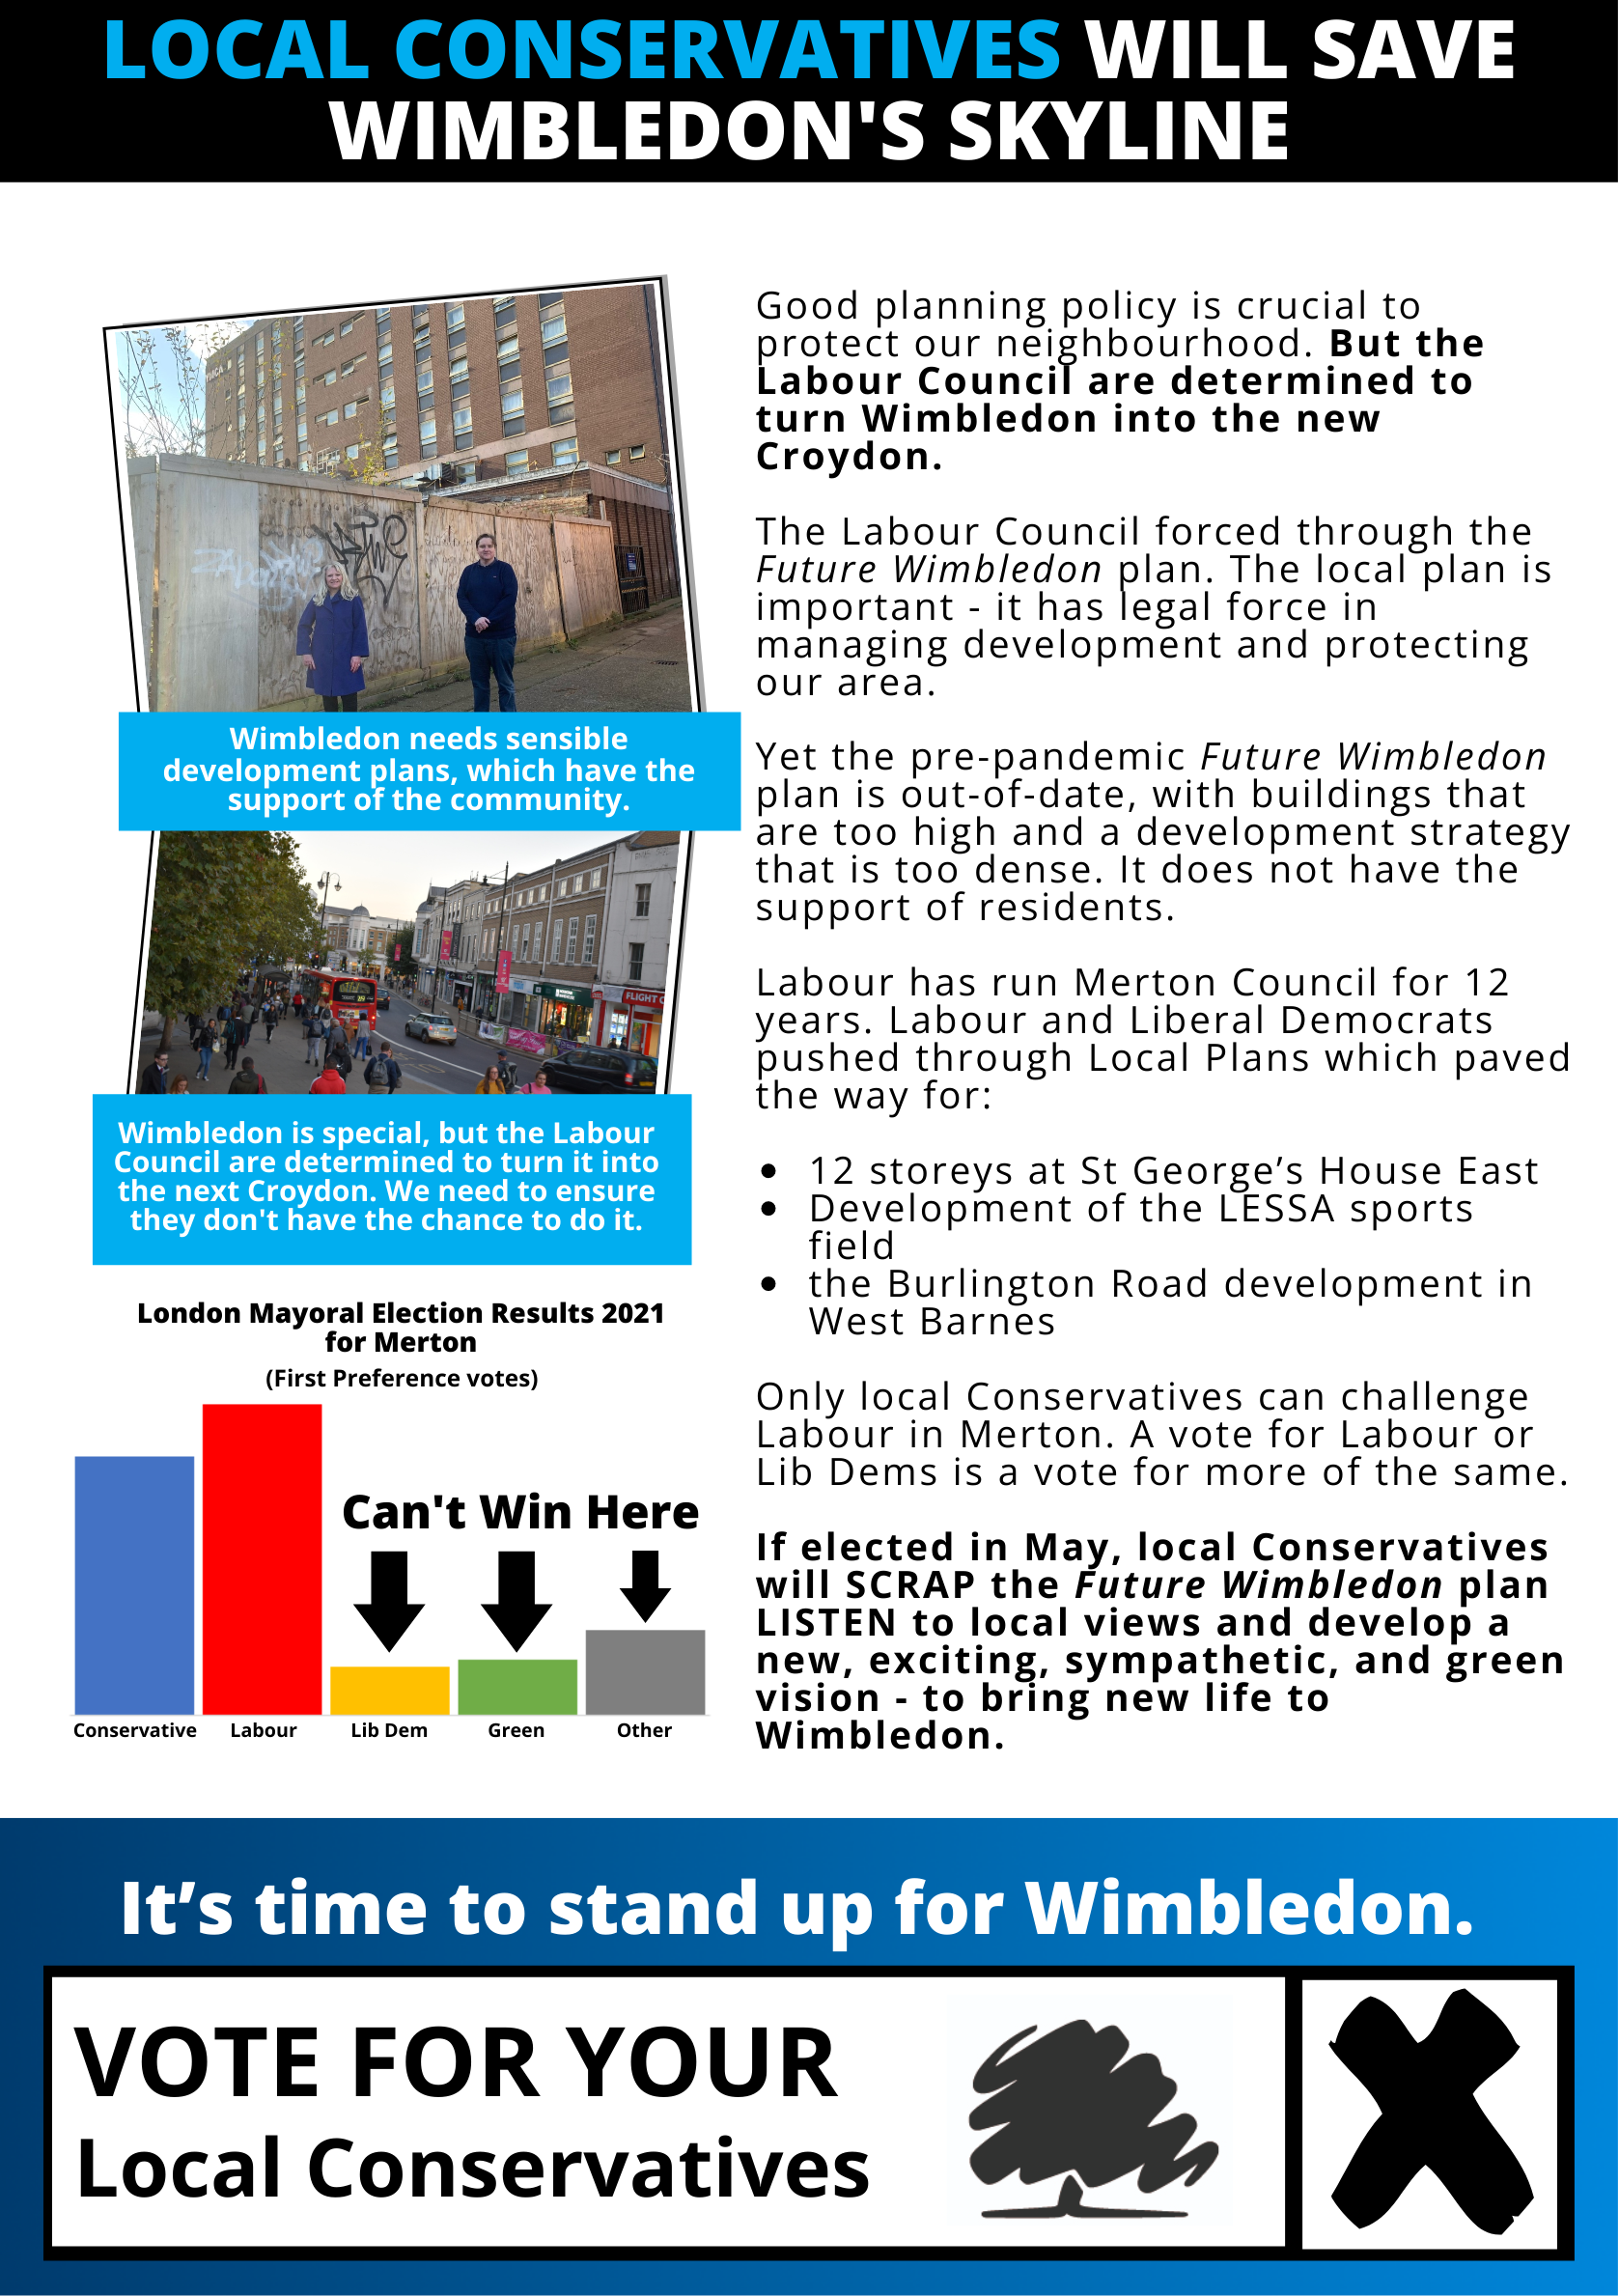 information on how local Conservatives will protect Wimbledon's skyline.